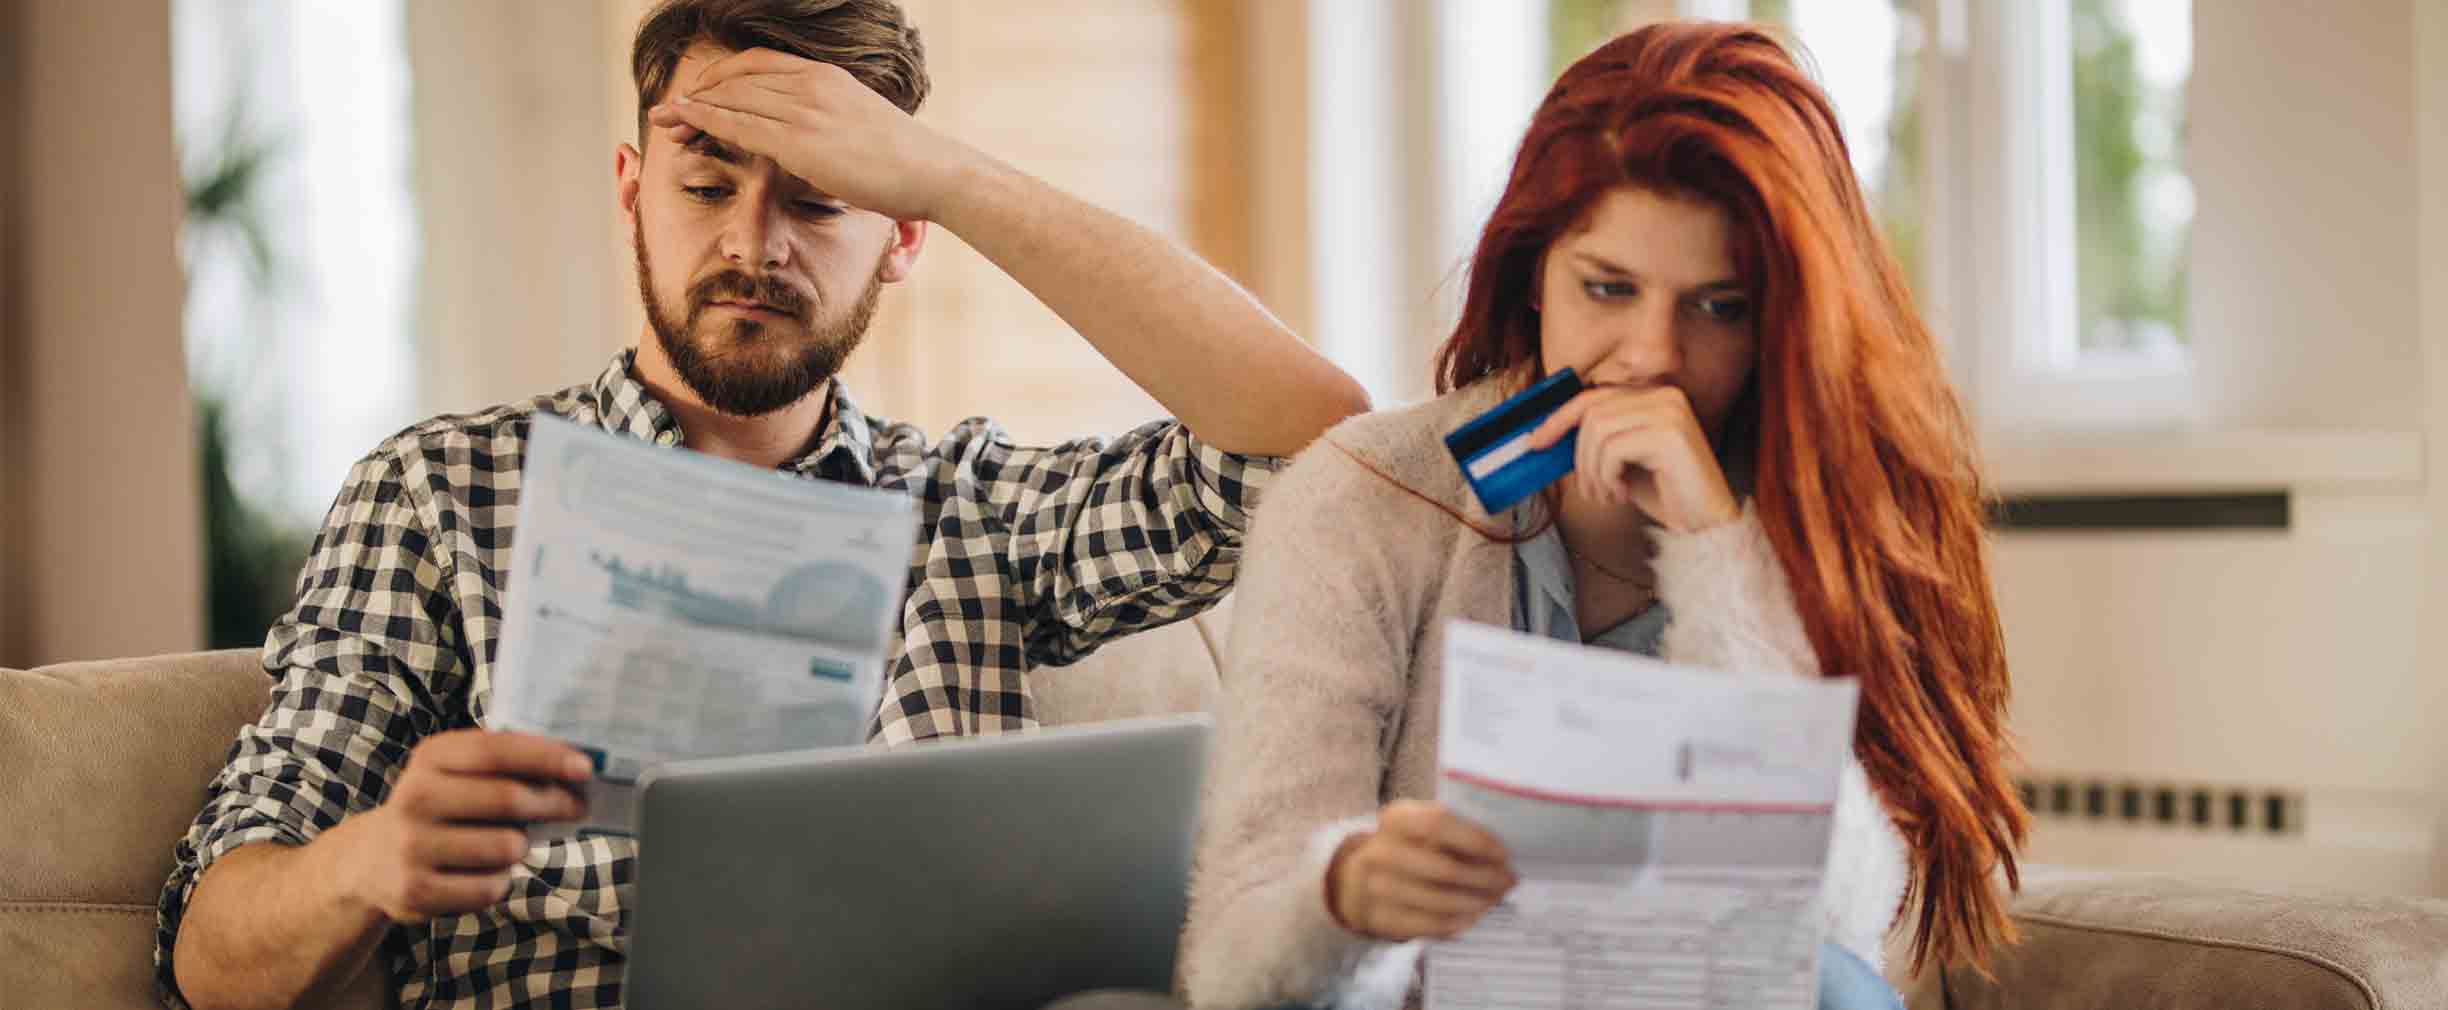 Worried couple feeling frustrated while holding a credit card and looking at a computer and bills